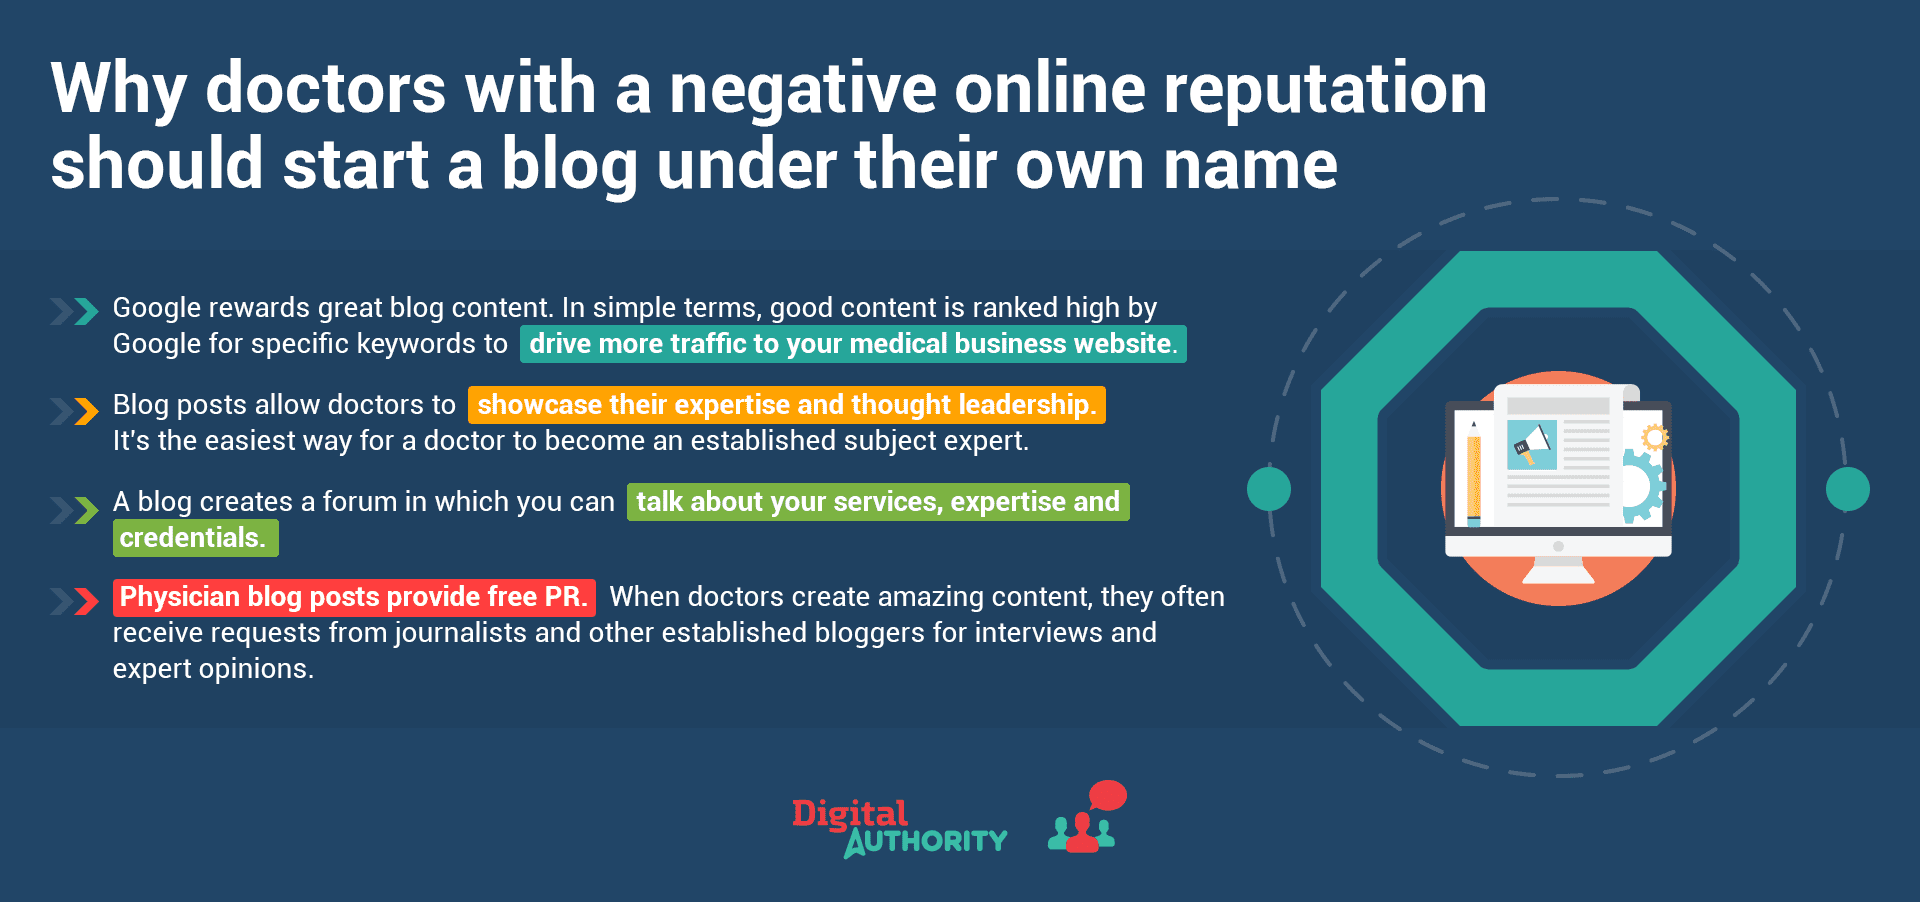 Infographic explaining why doctors with a negative online reputation should start a blog